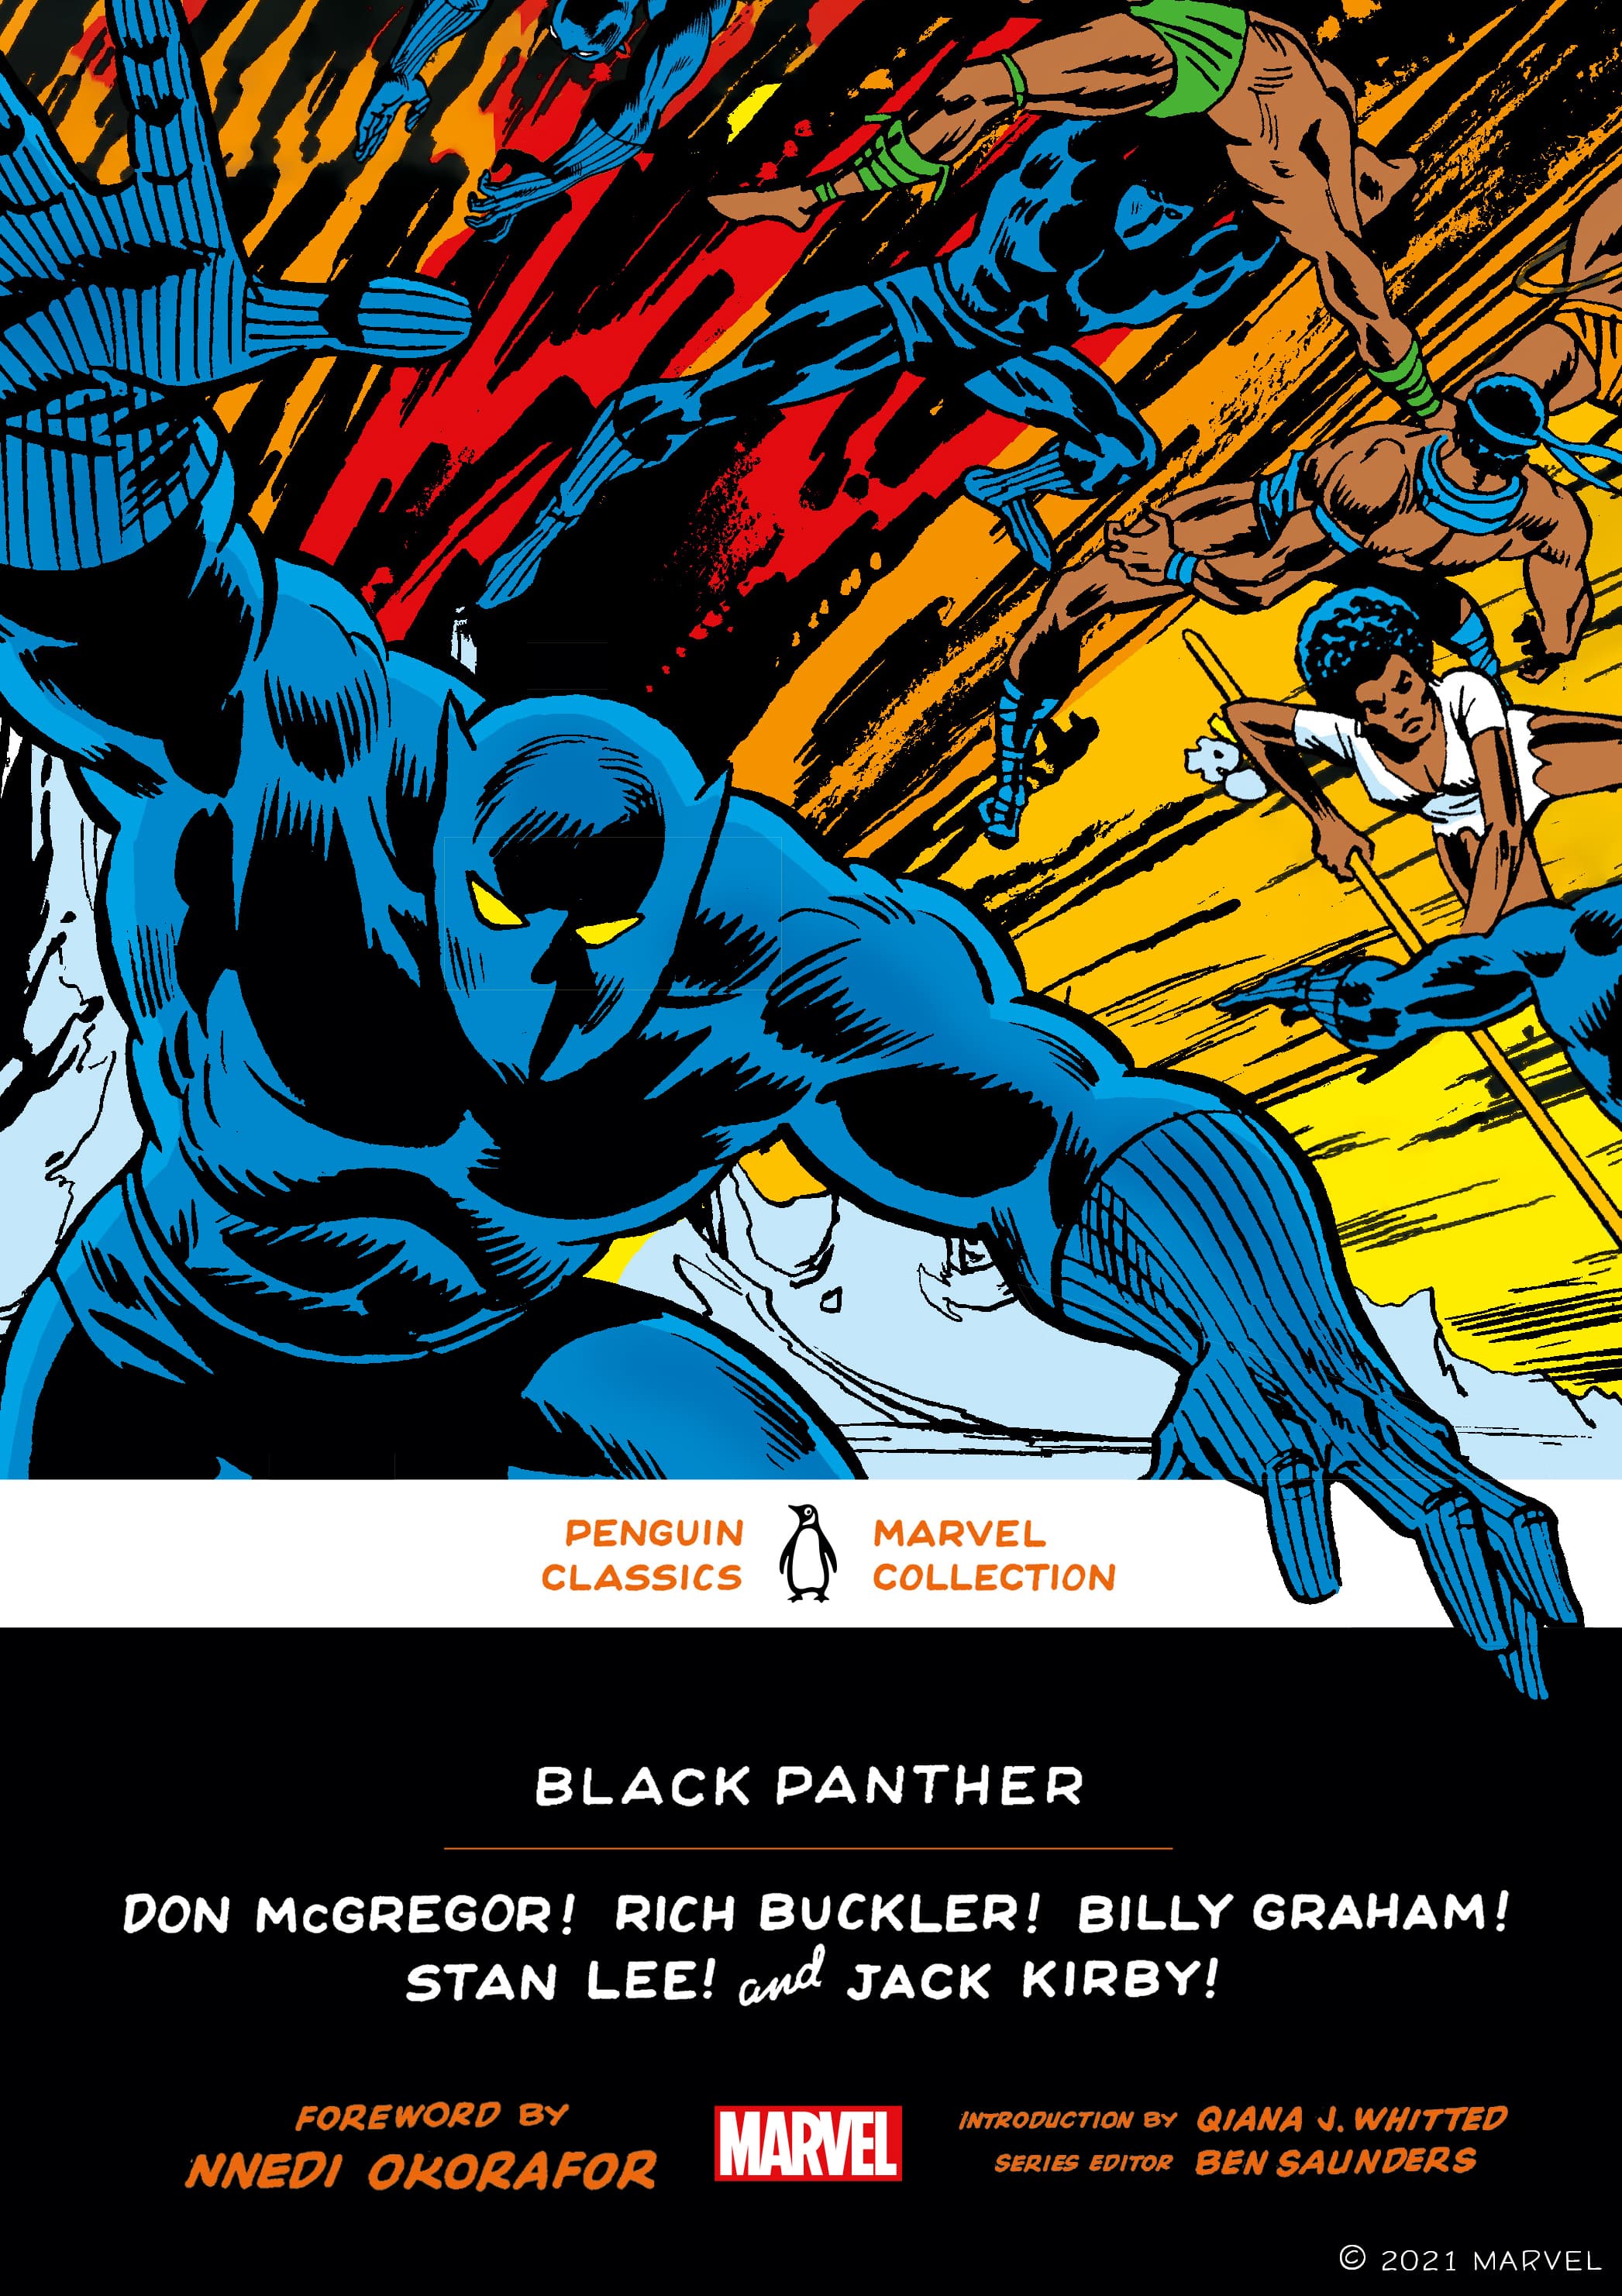 Penguin Classics to collaborate with Marvel | Marvel